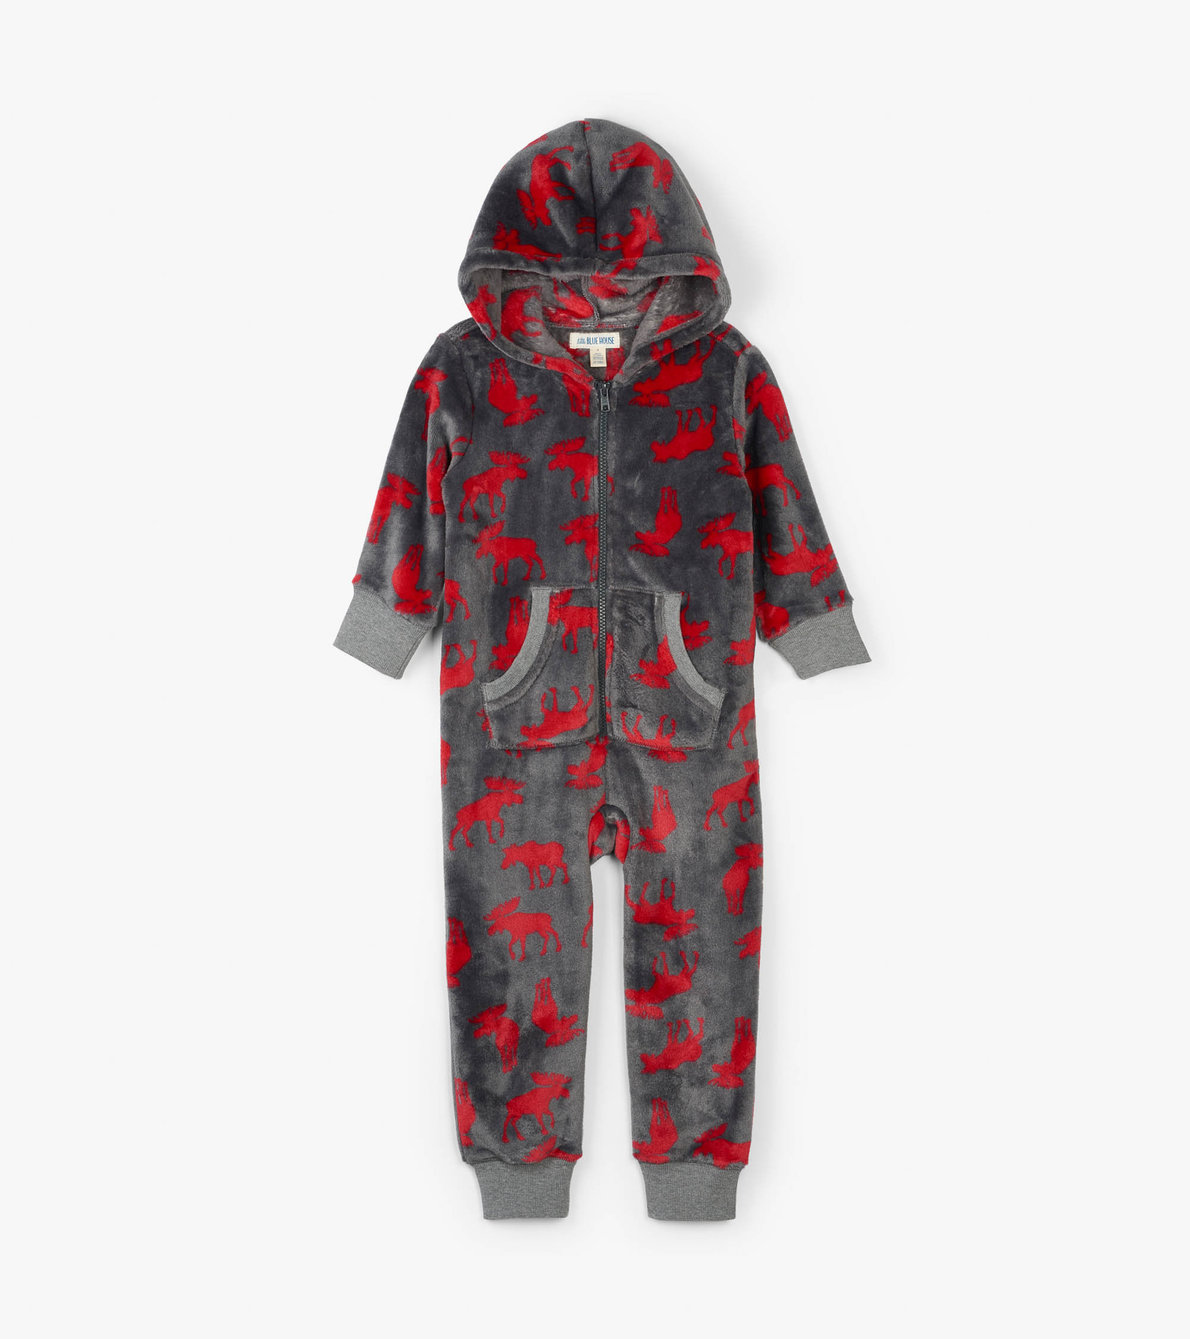 View larger image of Moose on Charcoal Kids Hooded Fleece Jumpsuit